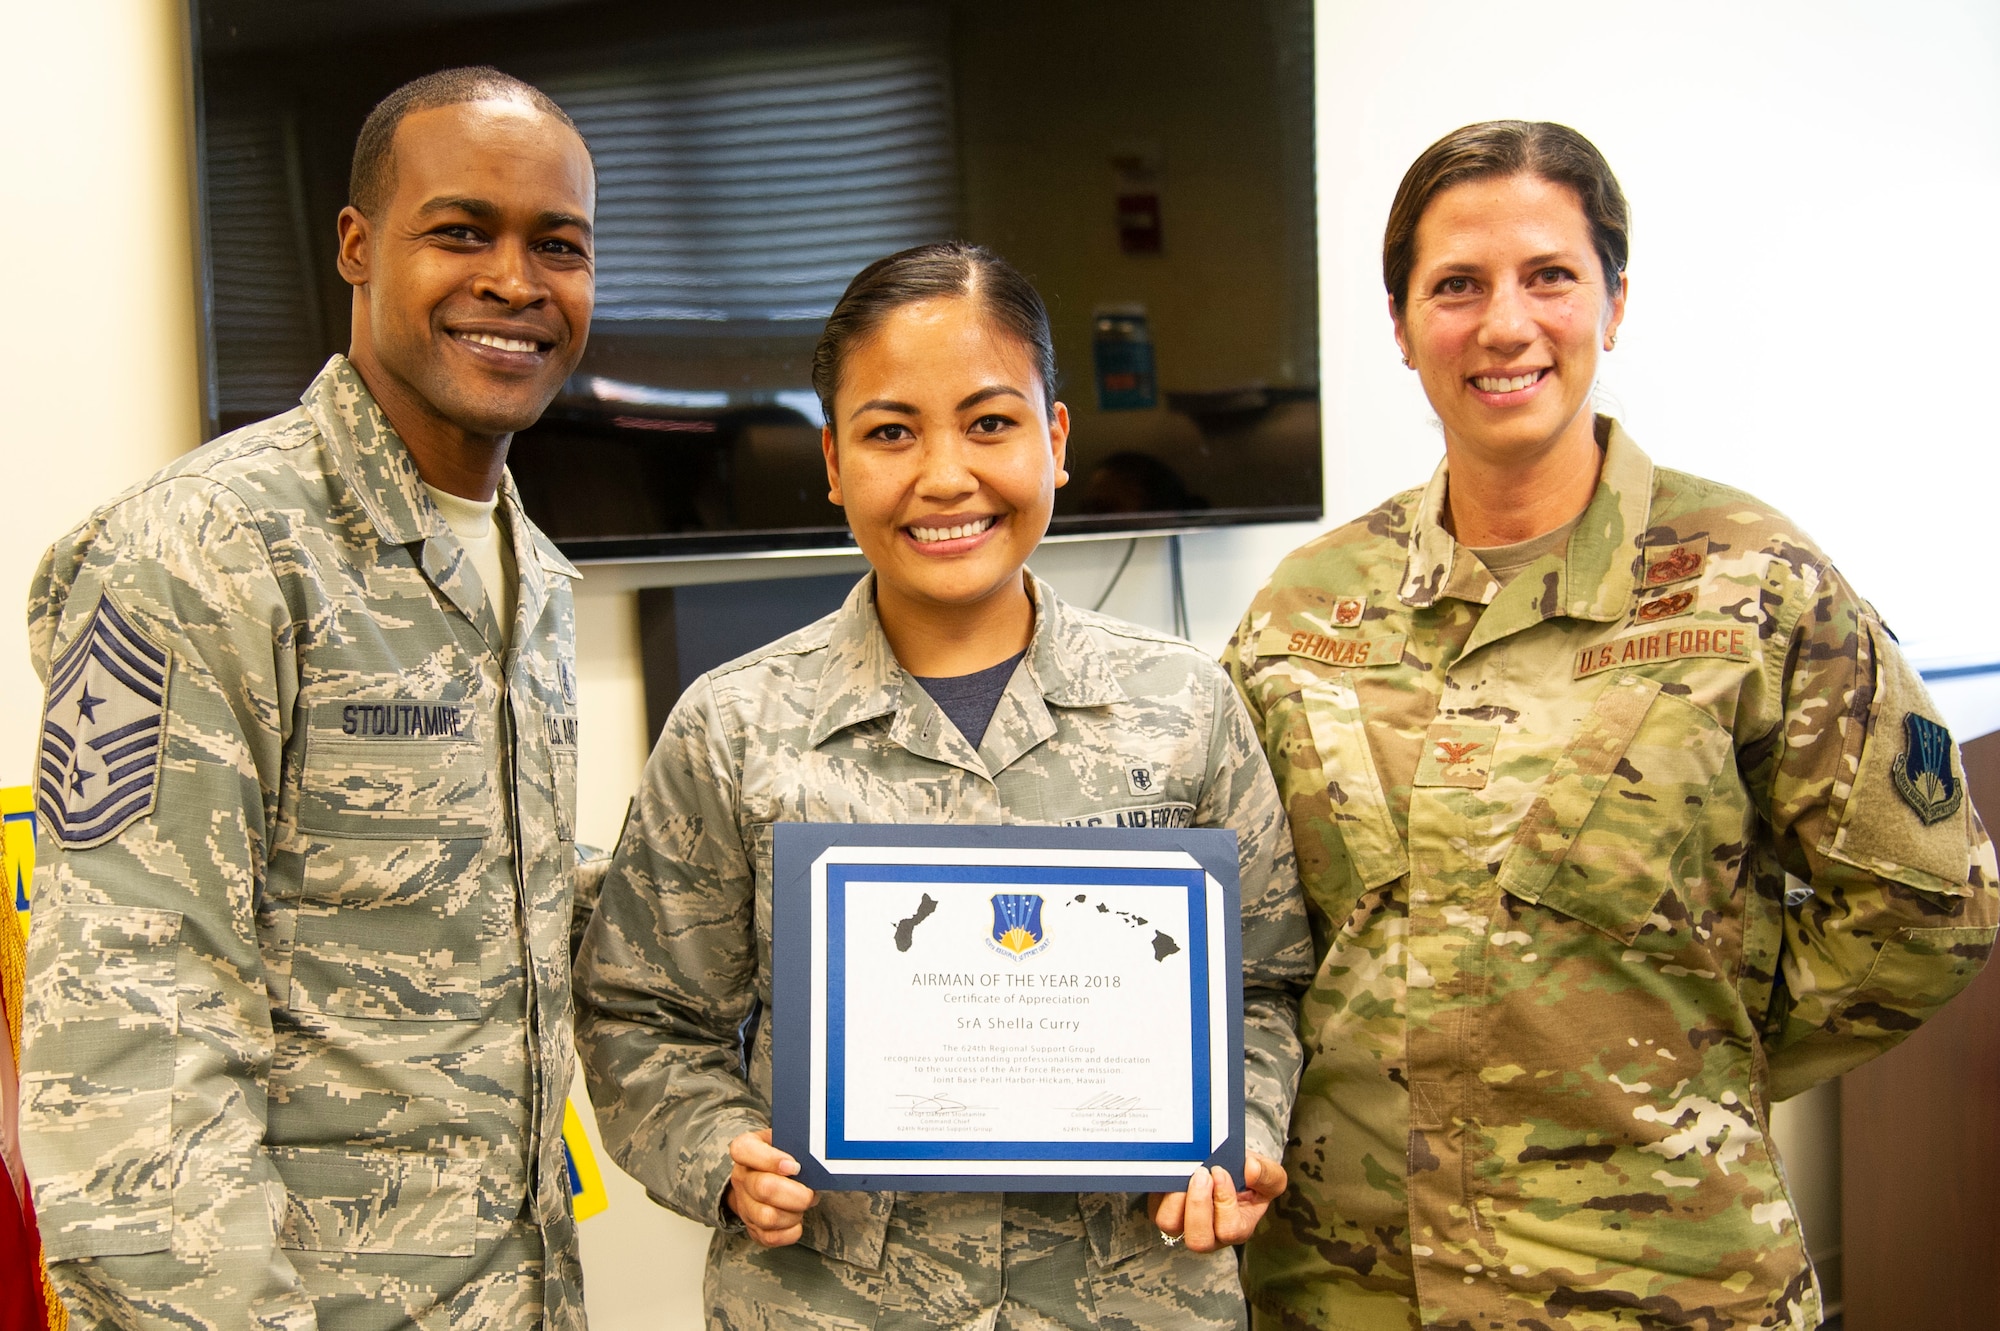 Senior Airman Shella Curry, a Reserve Citizen Airmen from the 624th Regional Support Group, receives the Group’s 2018 Airman of the Year award from Col. Athanasia Shinas, 624th RSG commander, and Chief Master Sgt. Danyell Stoutamire, 624th RSG command chief, during an awards presentation March 3, 2019, at Joint Base Pearl Harbor-Hickam, Hawaii.